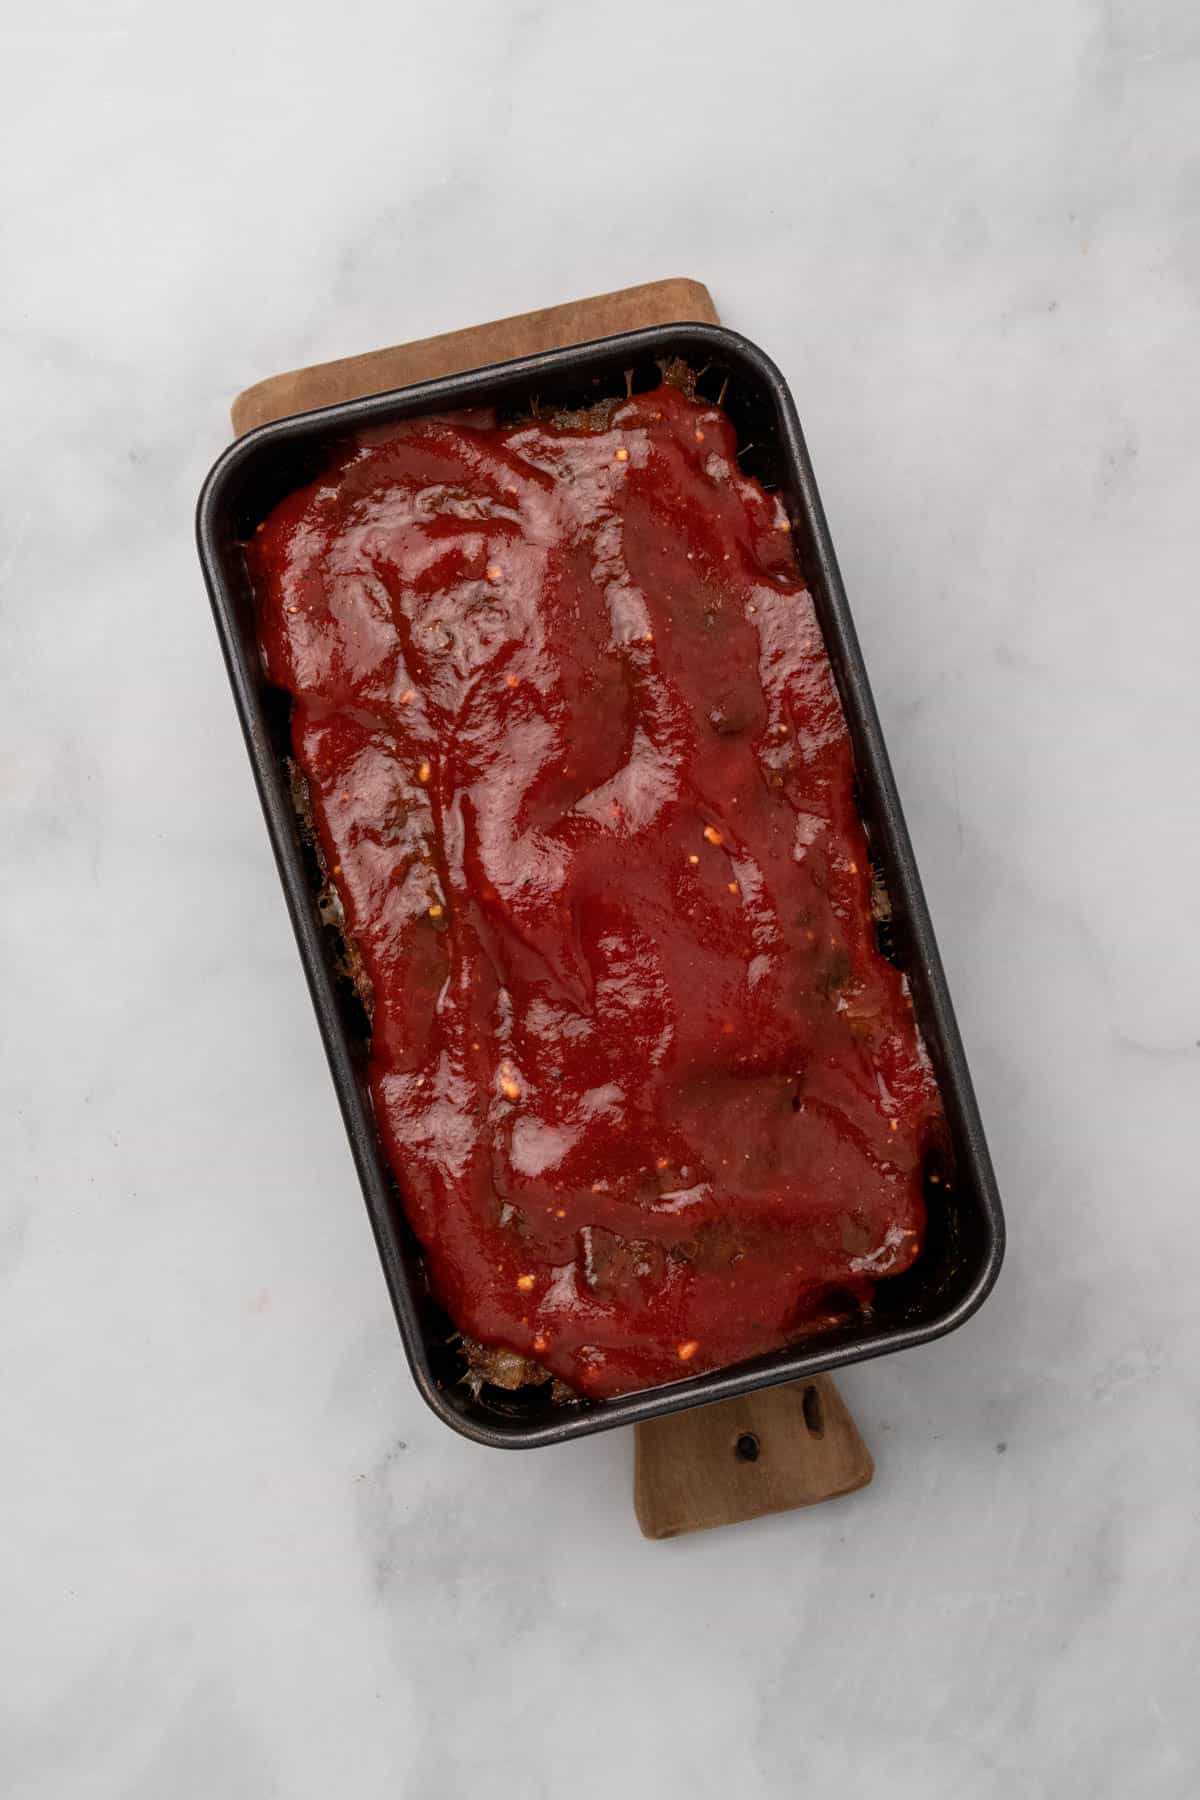 Tomato topping added to the meatloaf